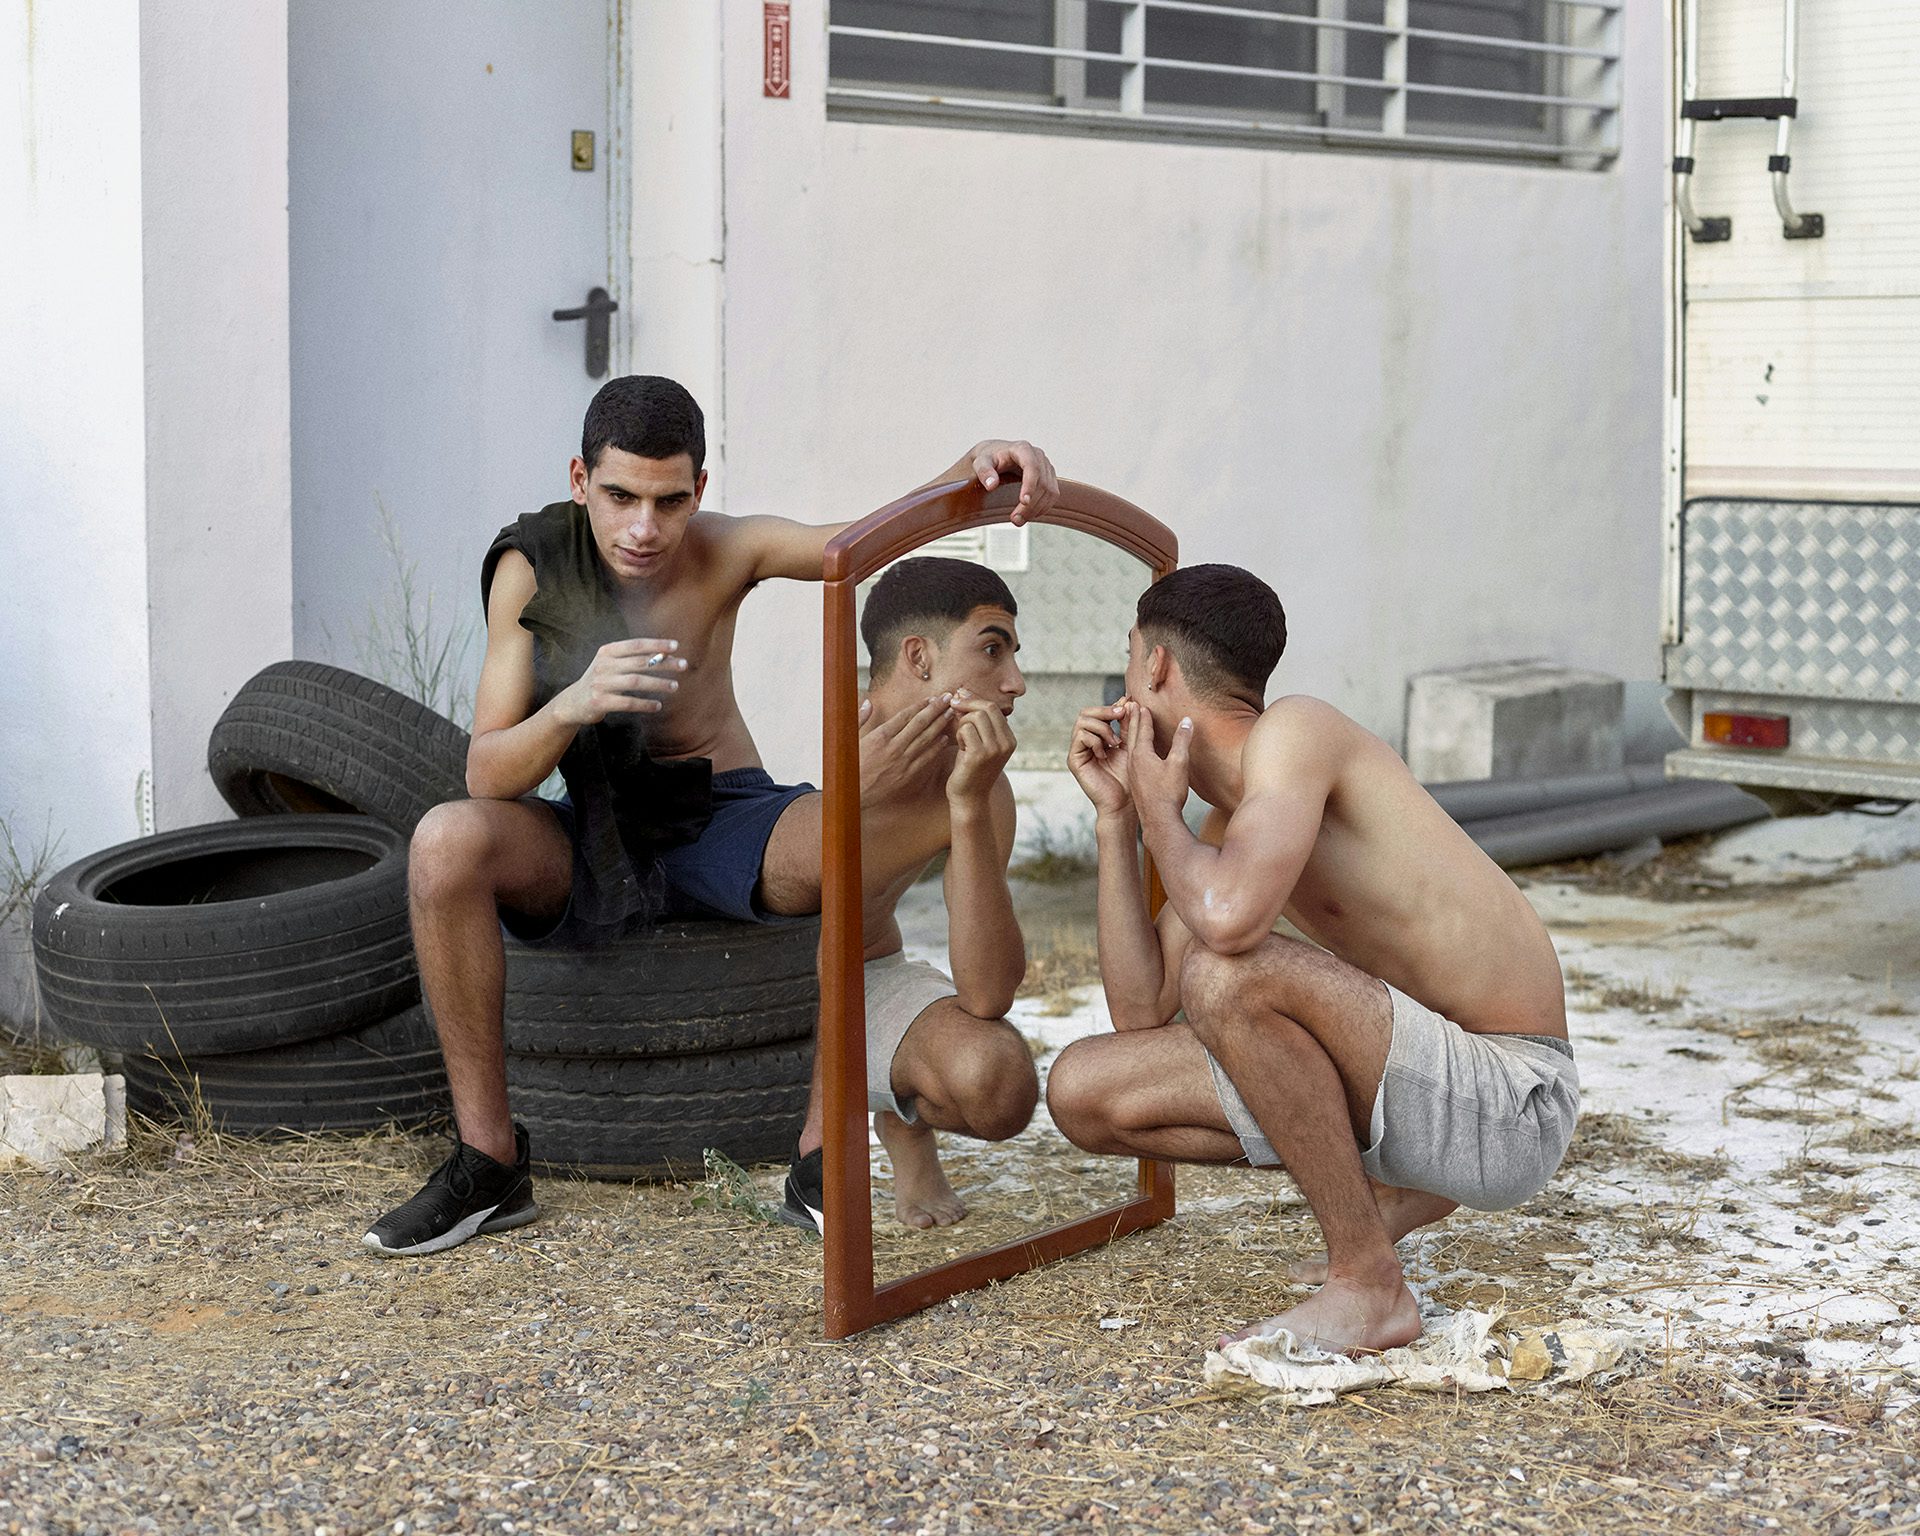 Photograph of a young person sat on a pile of car tyres smoking a cigarette and looking at the camera, holding a mirror that another young person wearing grey shorts is looking into, their reflection visible. The image is taken from Dialect by Felipe Romero Beltran